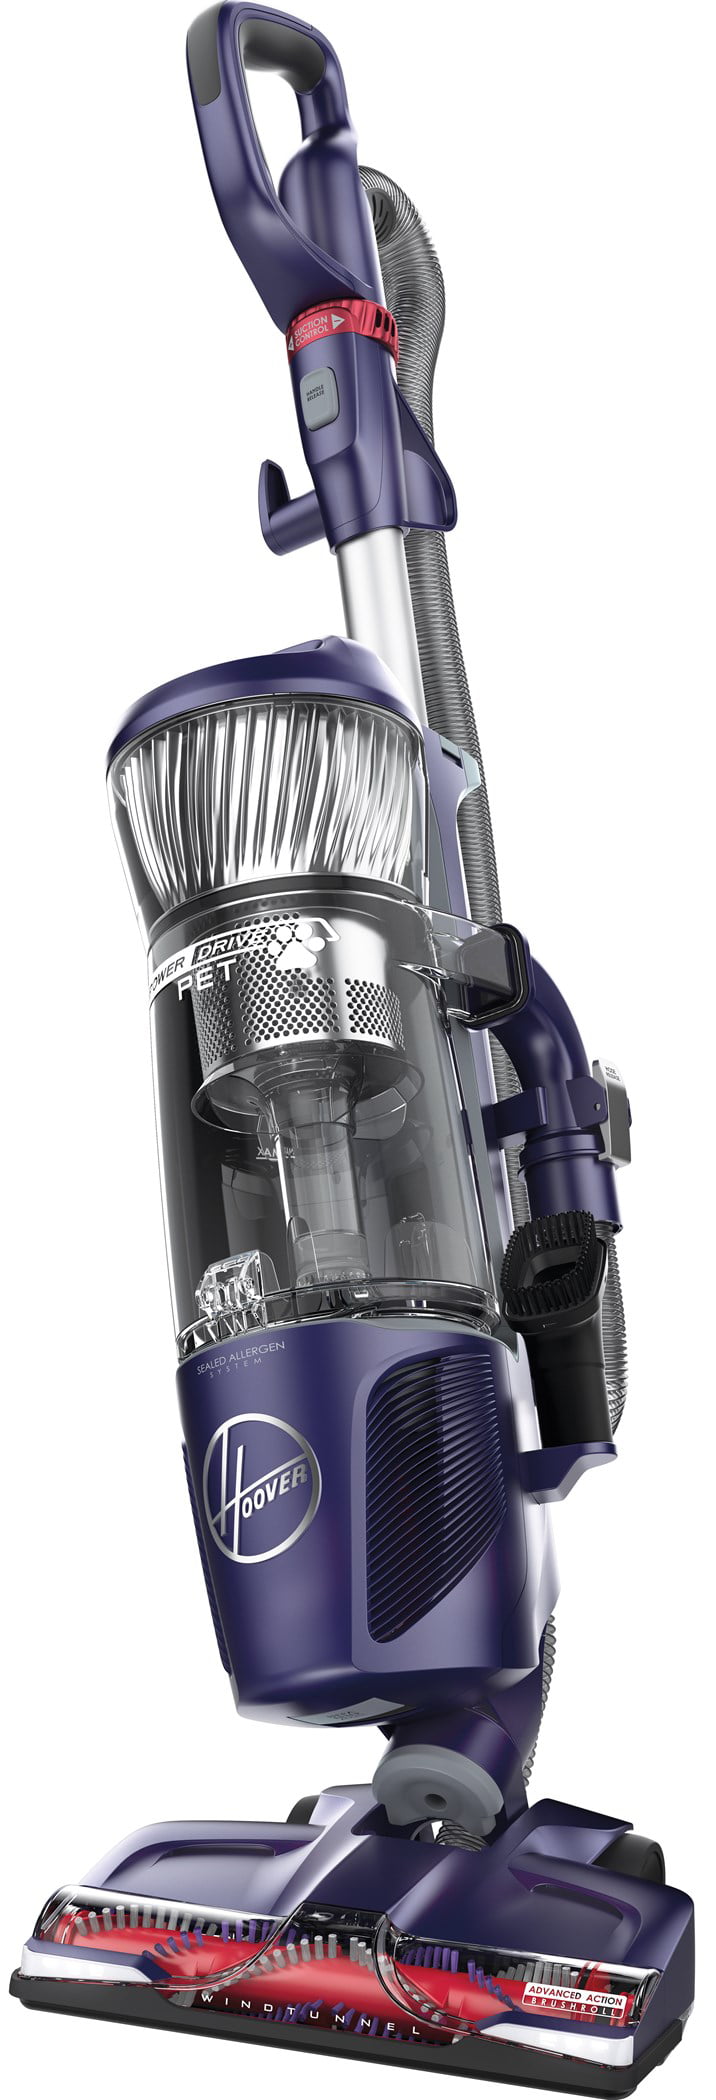 Hoover UH74210PC Purple Upright Vacuum Cleaner for sale online